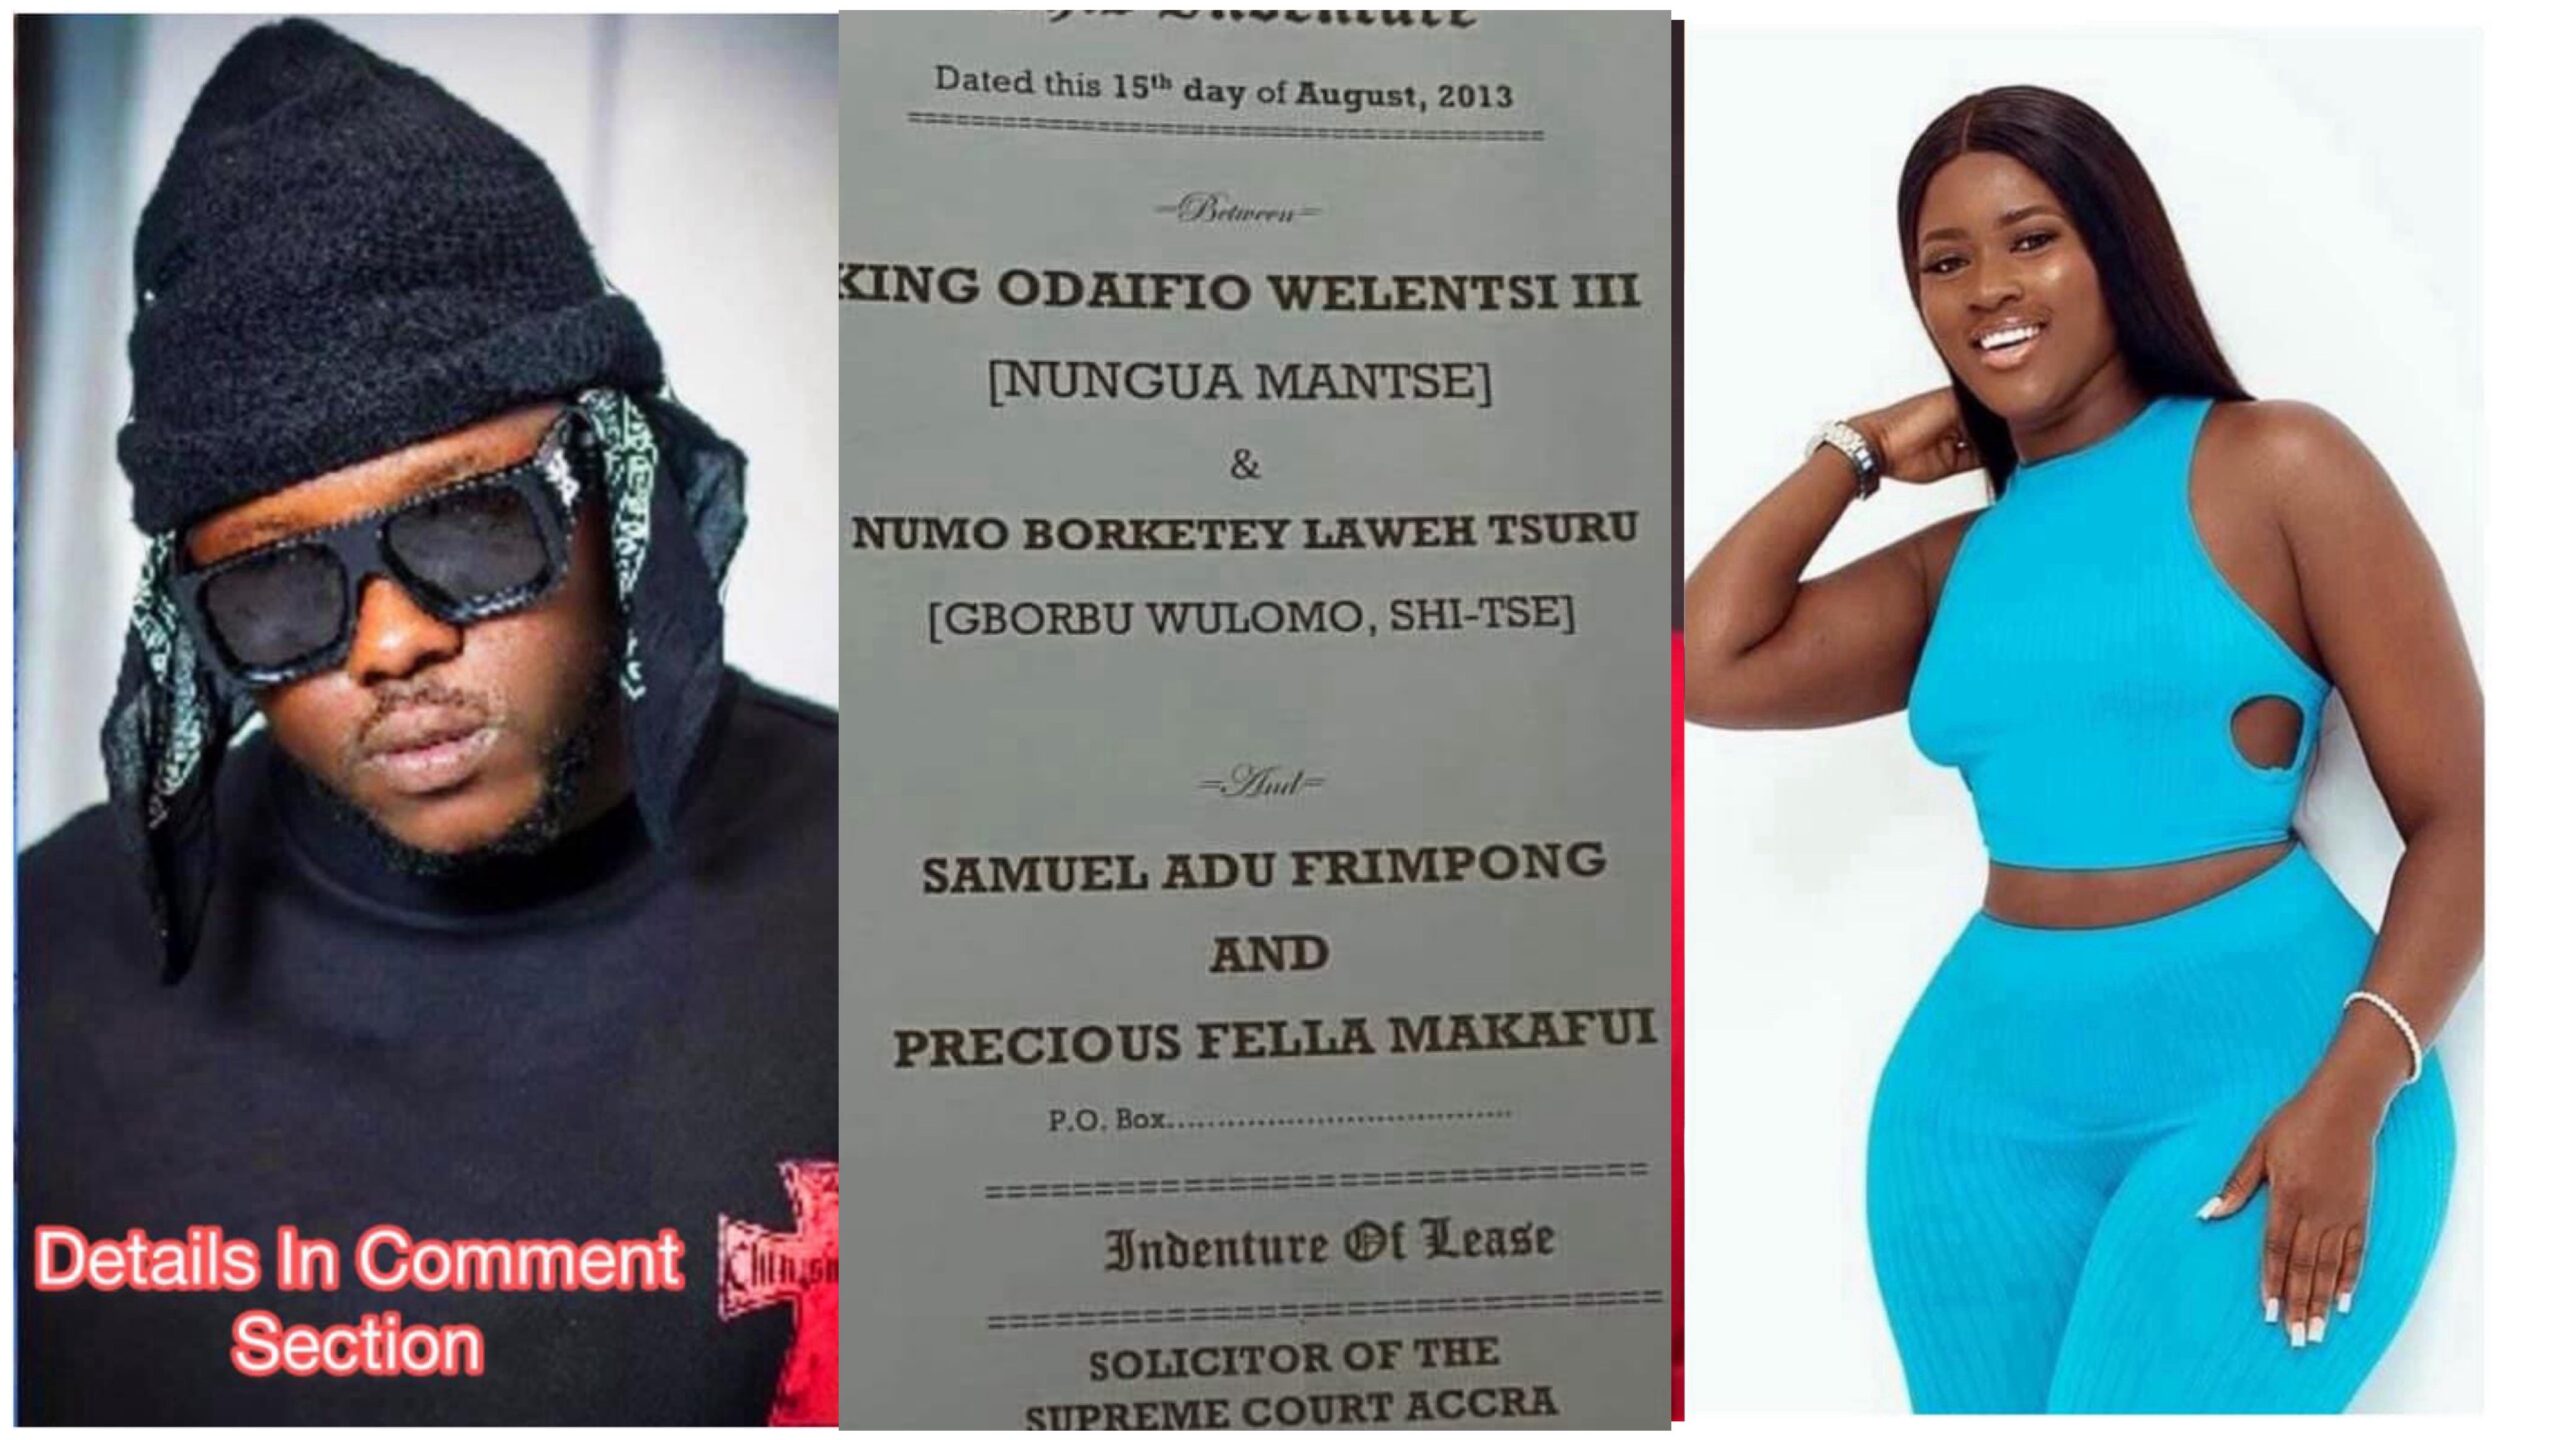 Nungua Traditional Council invites Medikal and Fella Makafui over their land documents